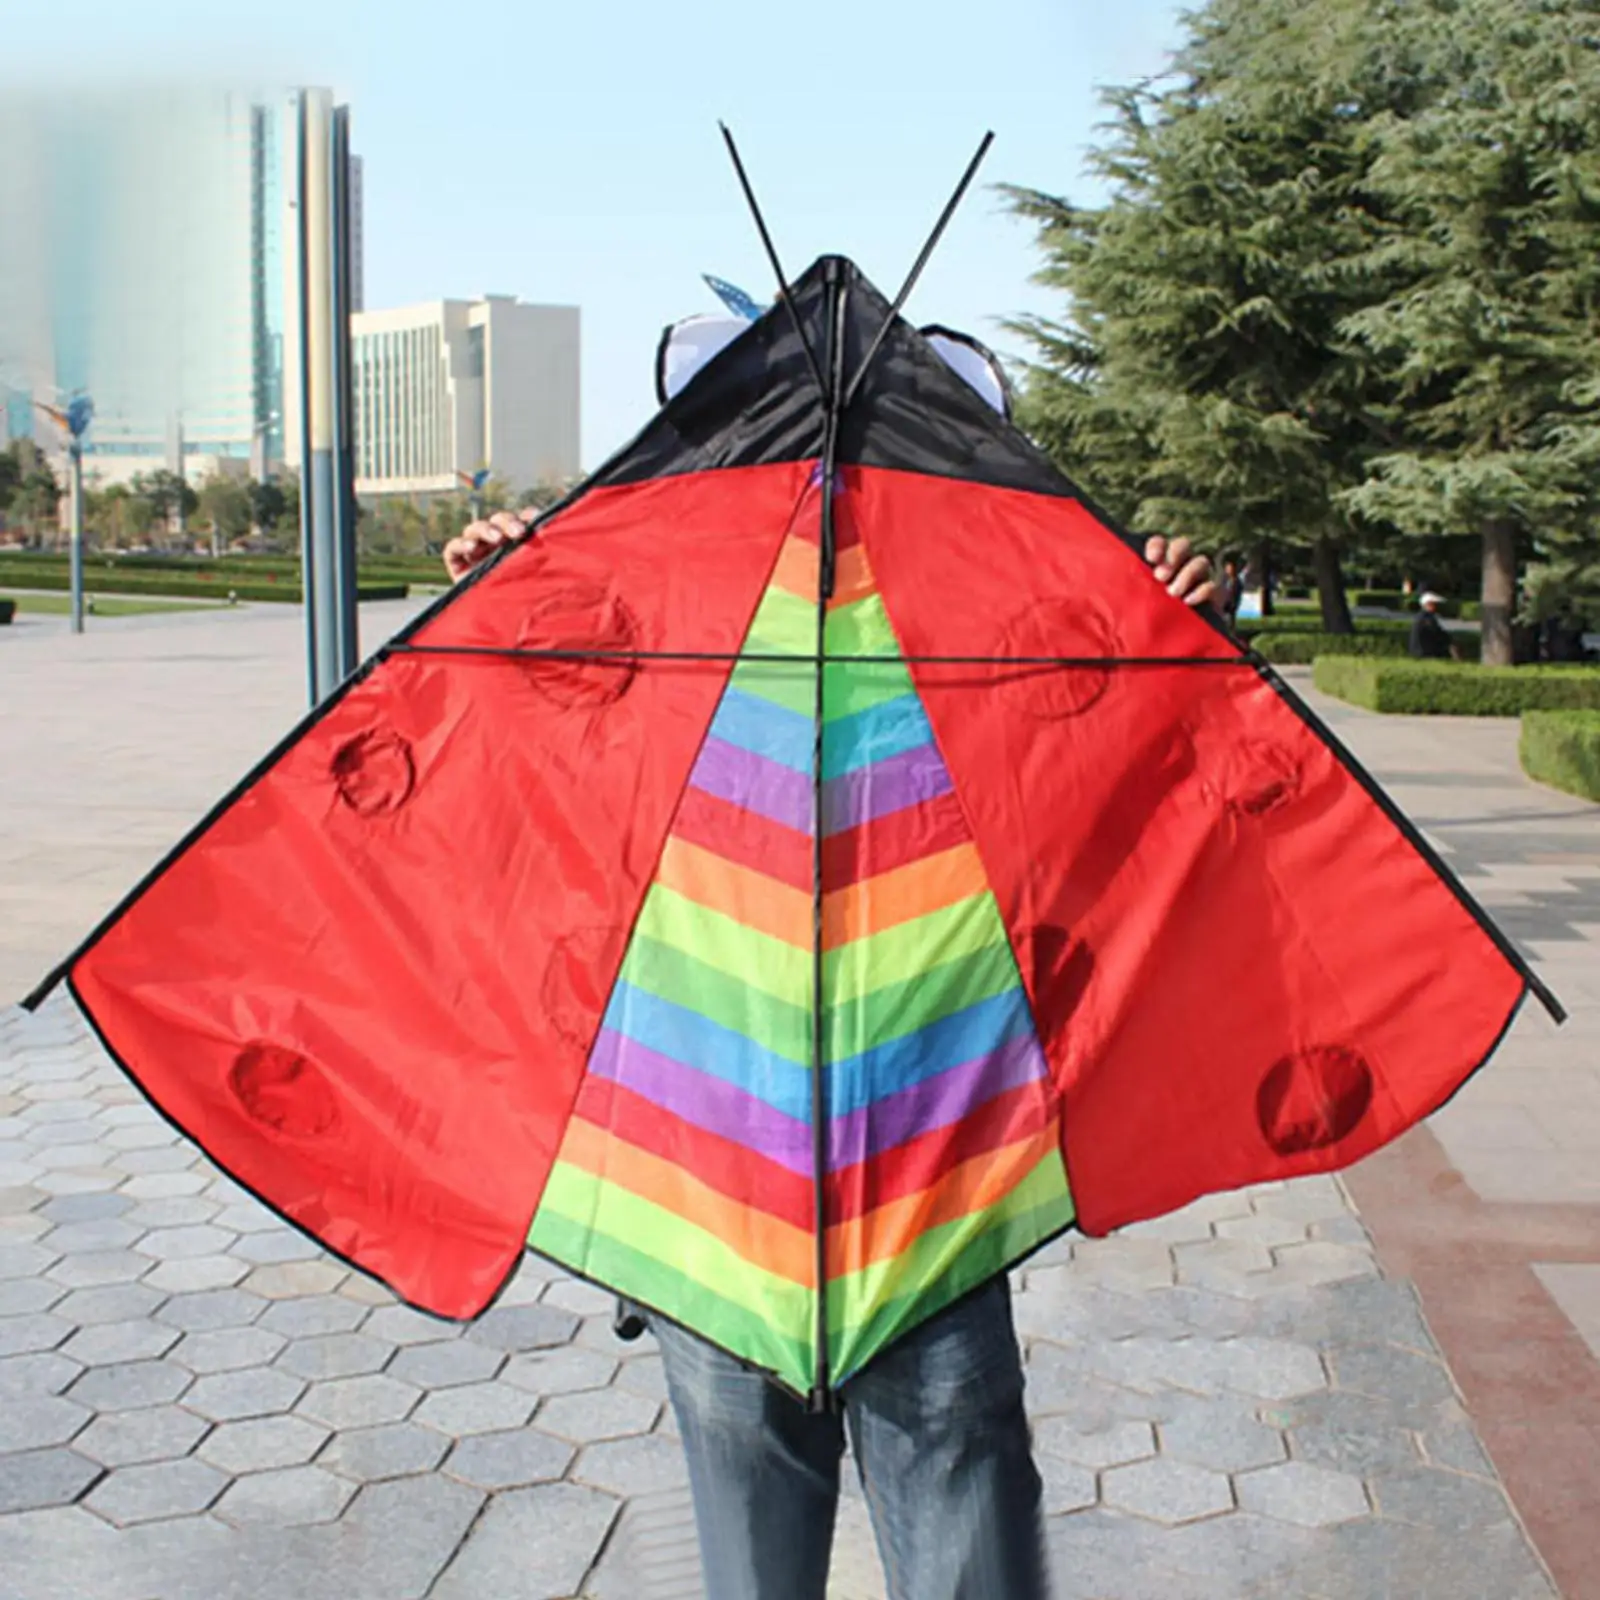 Foldable Delta Kite Fly Kite Easy Control Single Line Windsock Fun Toy Huge Wingspan Giant Triangle Ladybug Kite for Park Garden